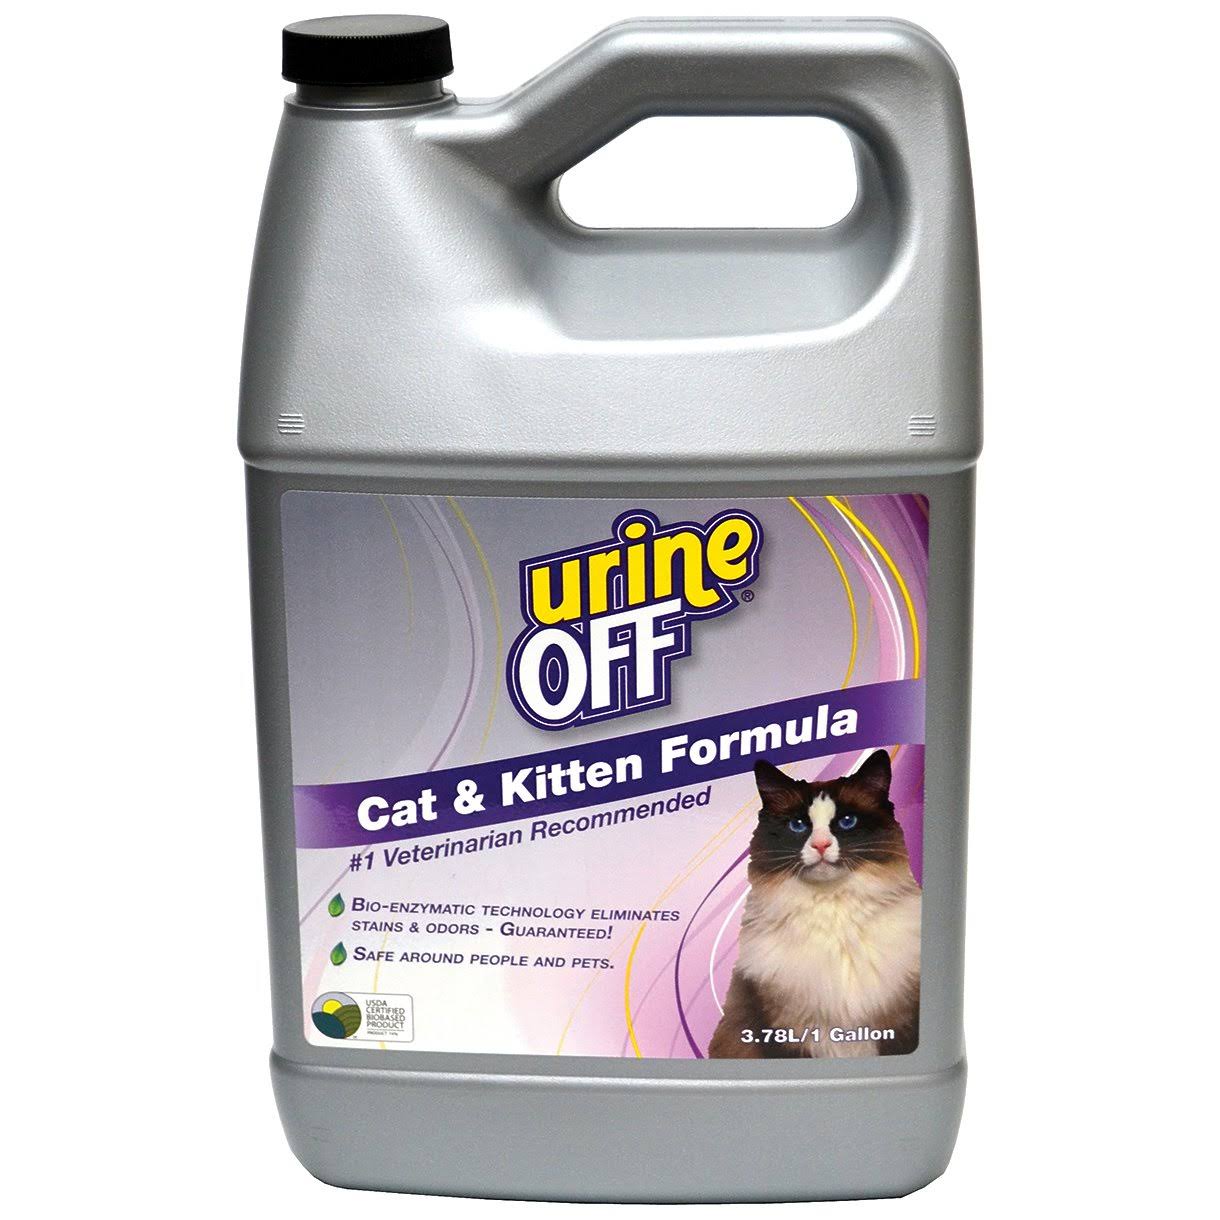 Urine off Pt6003 Odor and Stain Remover - for Cats, 1gal